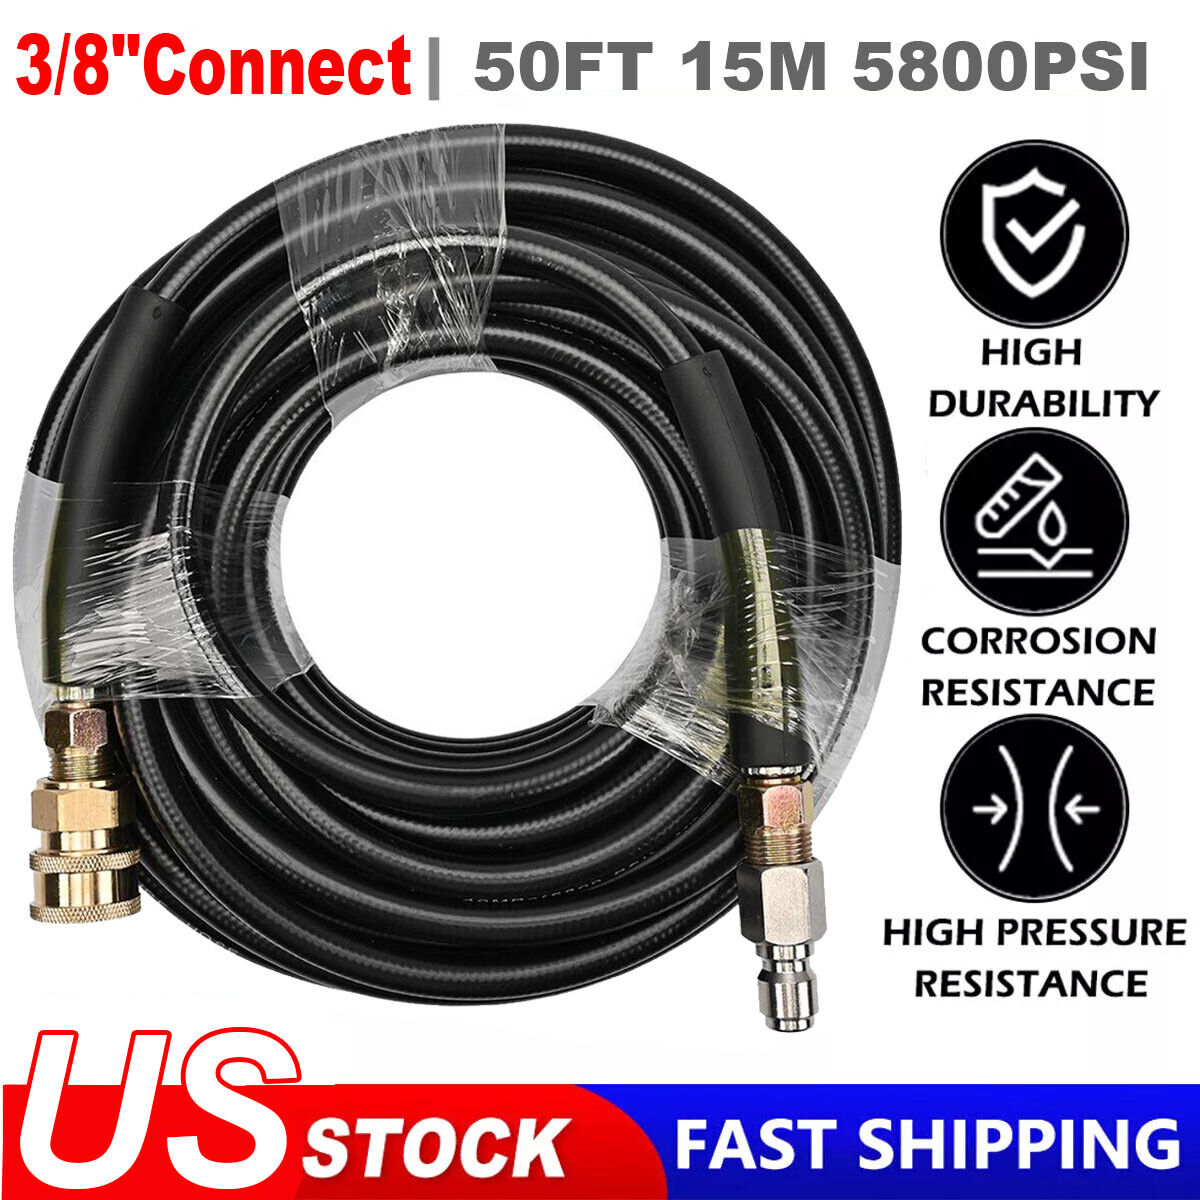 50FT 5800 PSI High Pressure Power Washer Replacement Hose 3/8